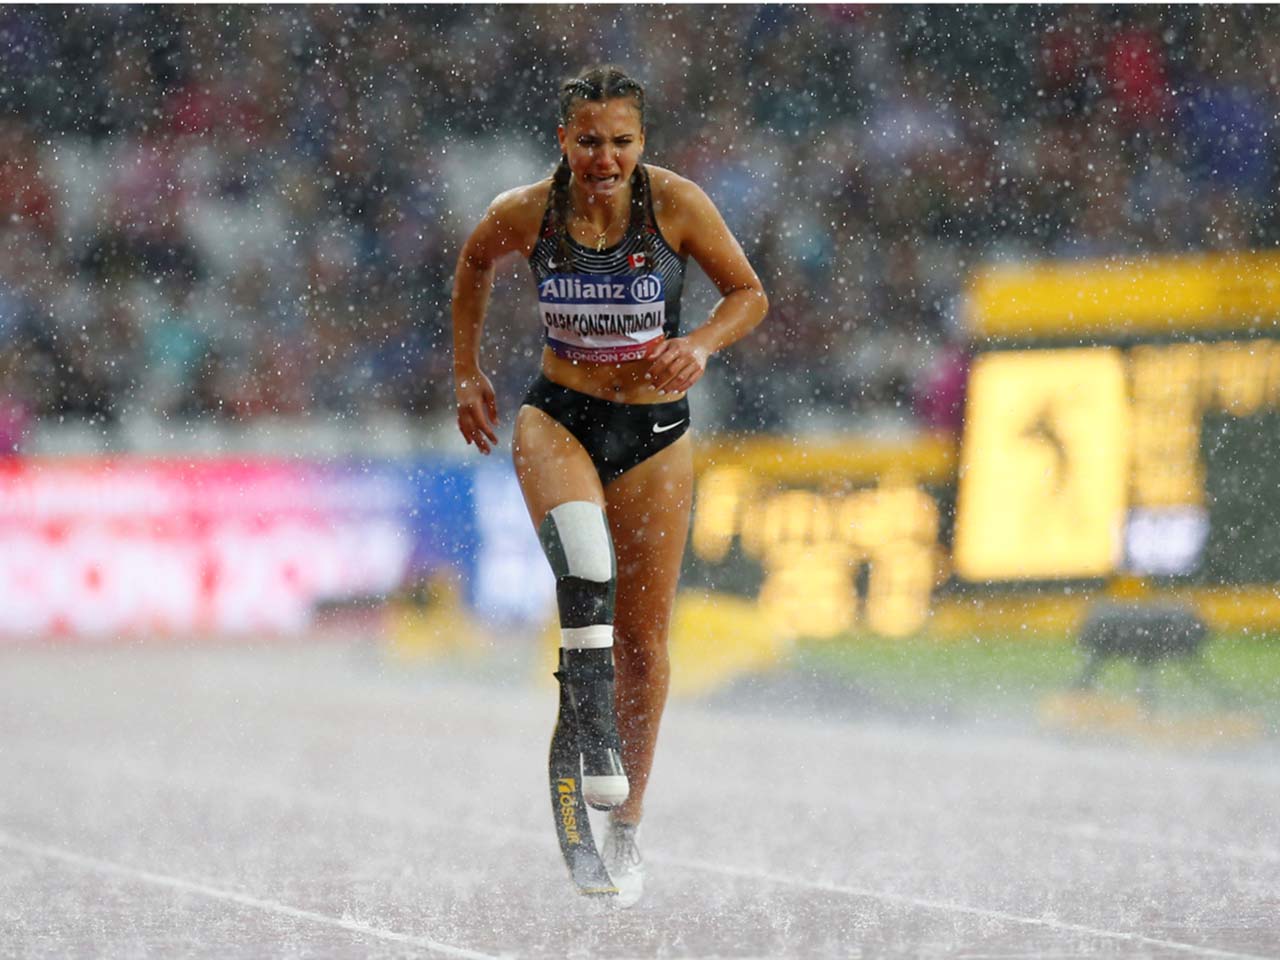 22 Photos From 2017 That Tell A Story: During IAAF World ParaAthletics Championship for Women’s 200m T44 Final, Marissa Papaconstantinou (Canada) fell down but managed to finish the race.